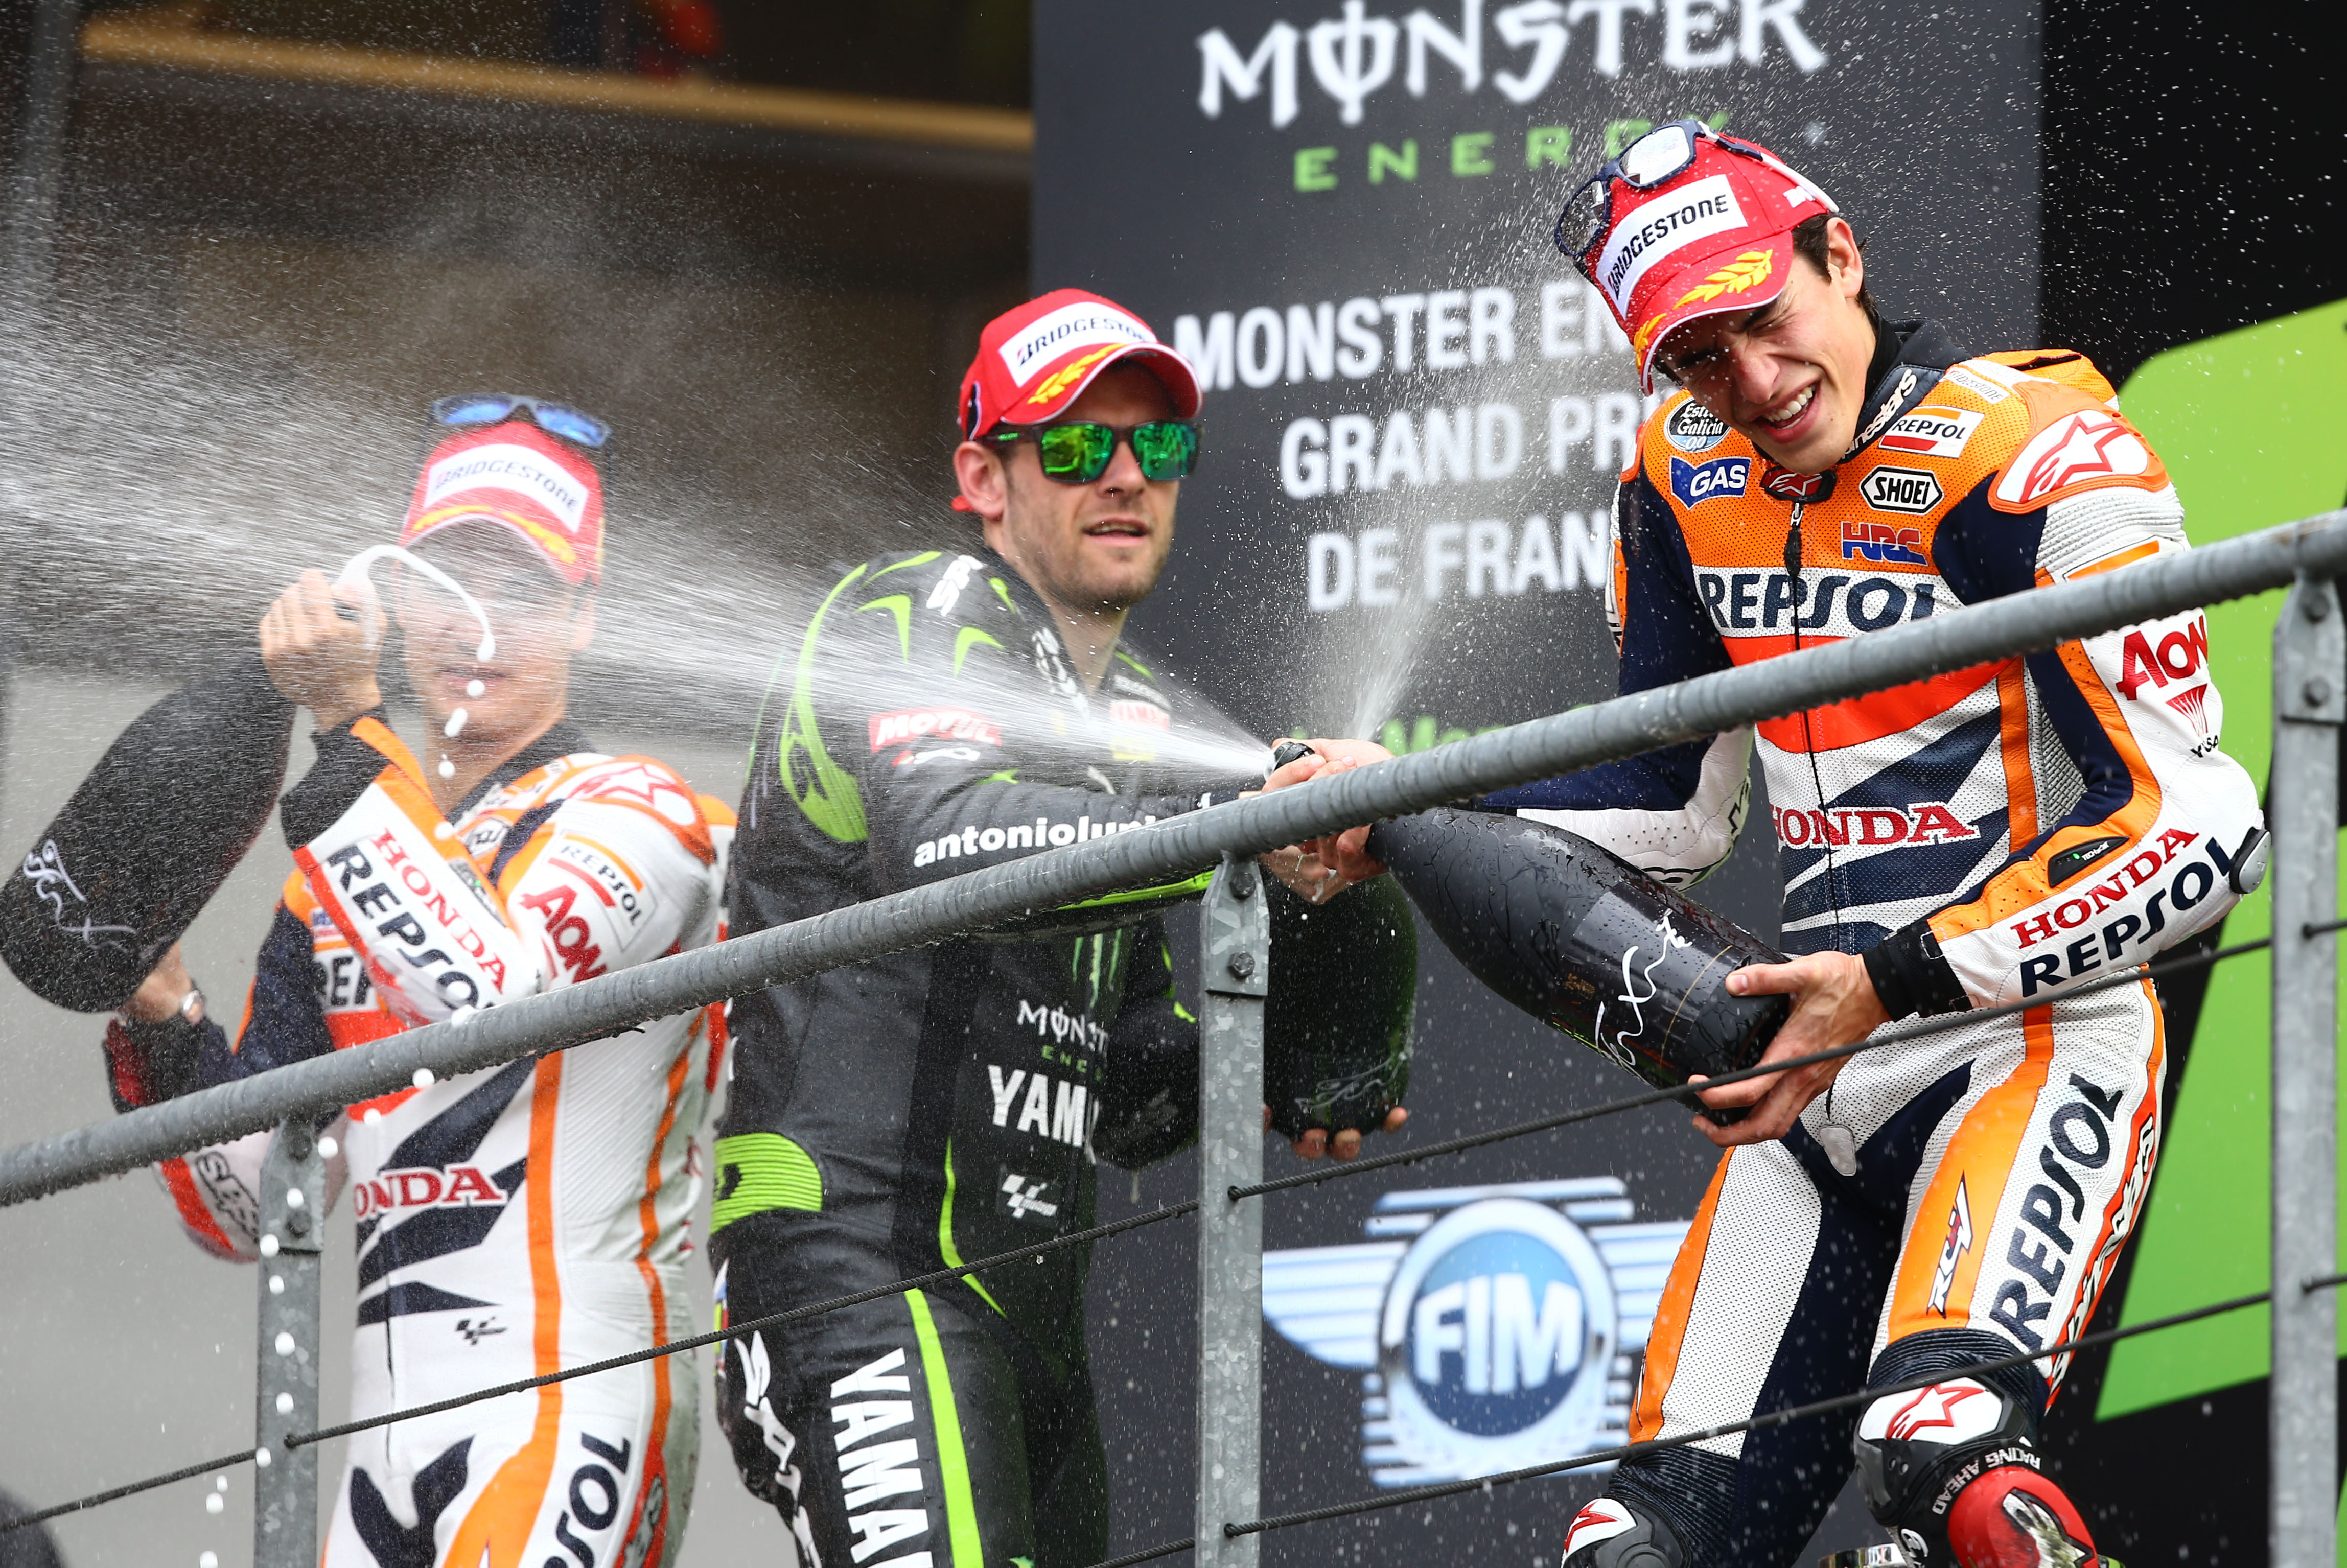 MotoGP 2013: Le Mans Results – Crutchlow takes career-best second place carrying injury